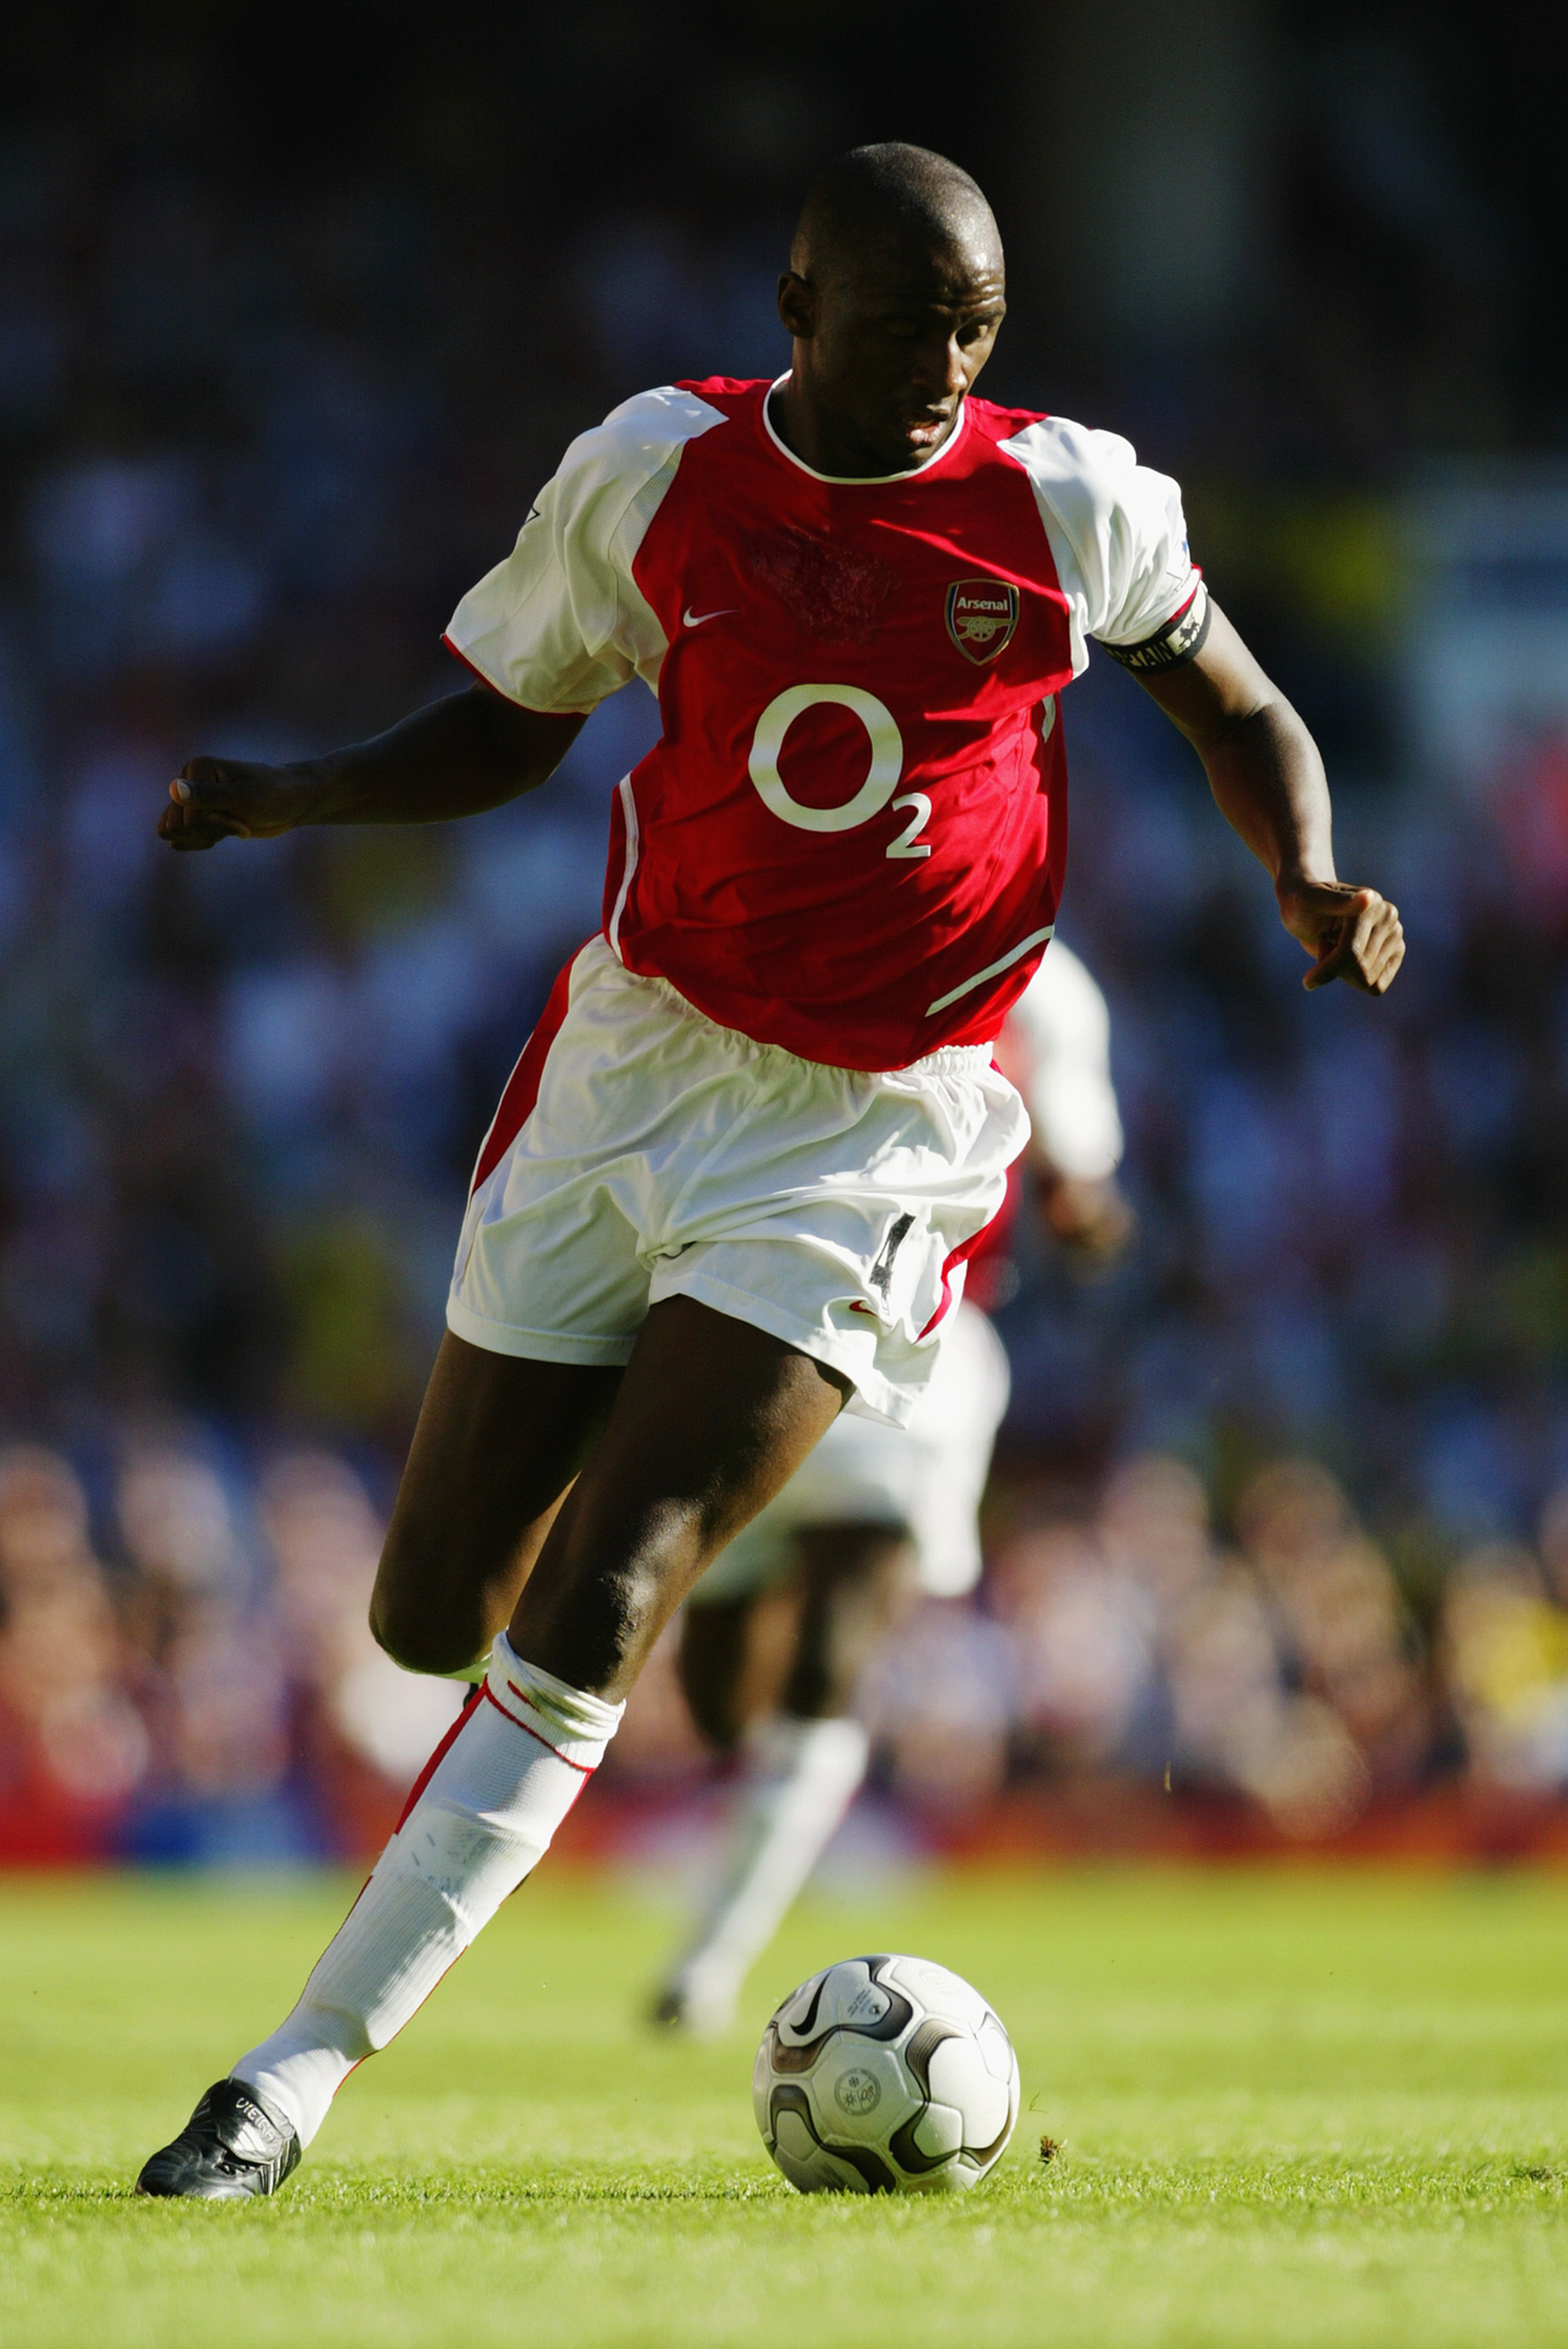 LONDON - SEPTEMBER 13:  Patrick Vieira of Arsenal running with the ball during the FA Barclaycard Premiership match between Arsenal and Portsmouth on September 13, 2003 at Highbury on September 13, 2003 in London, England. The match ended in a 1-1 draw. (